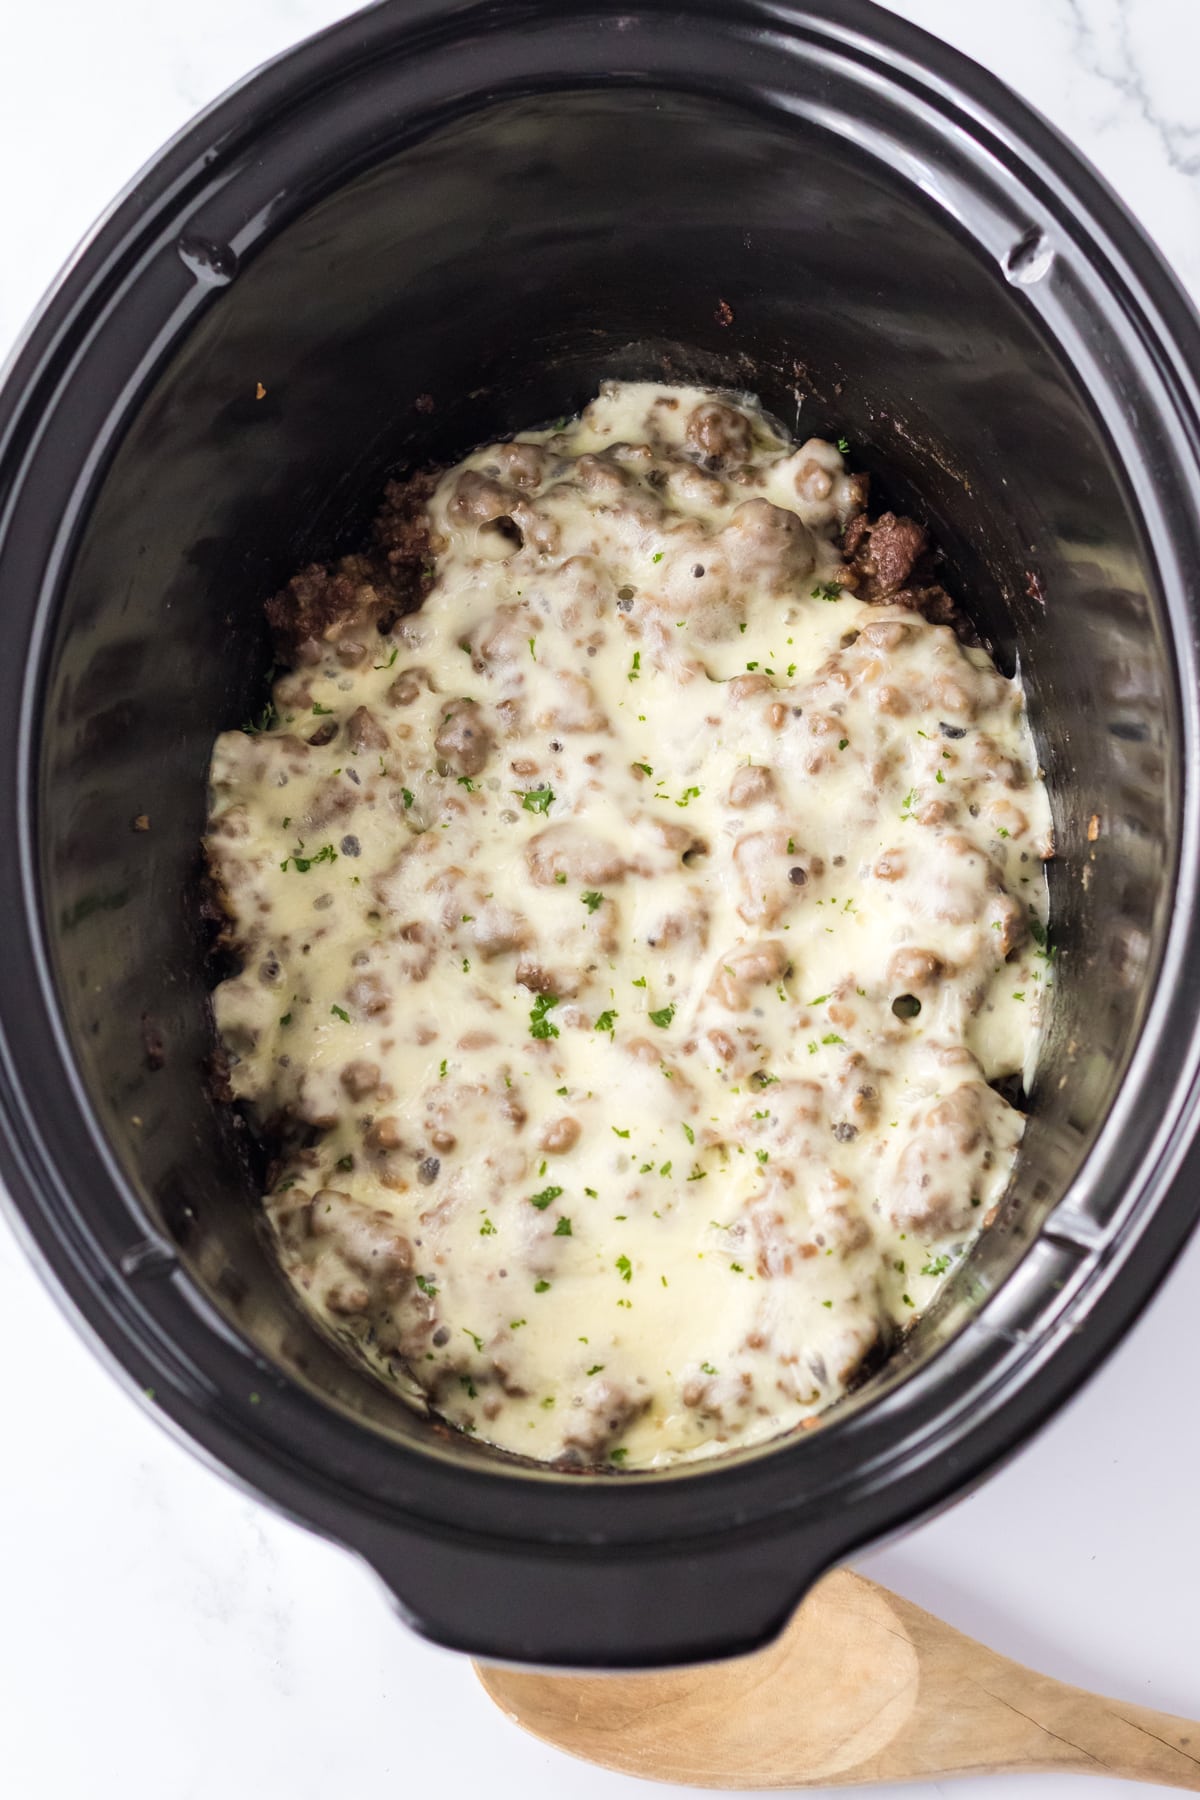 Adding the cheese on top of the mixture is another process of preparing Slow Cooker French Dip Sloppy Joes